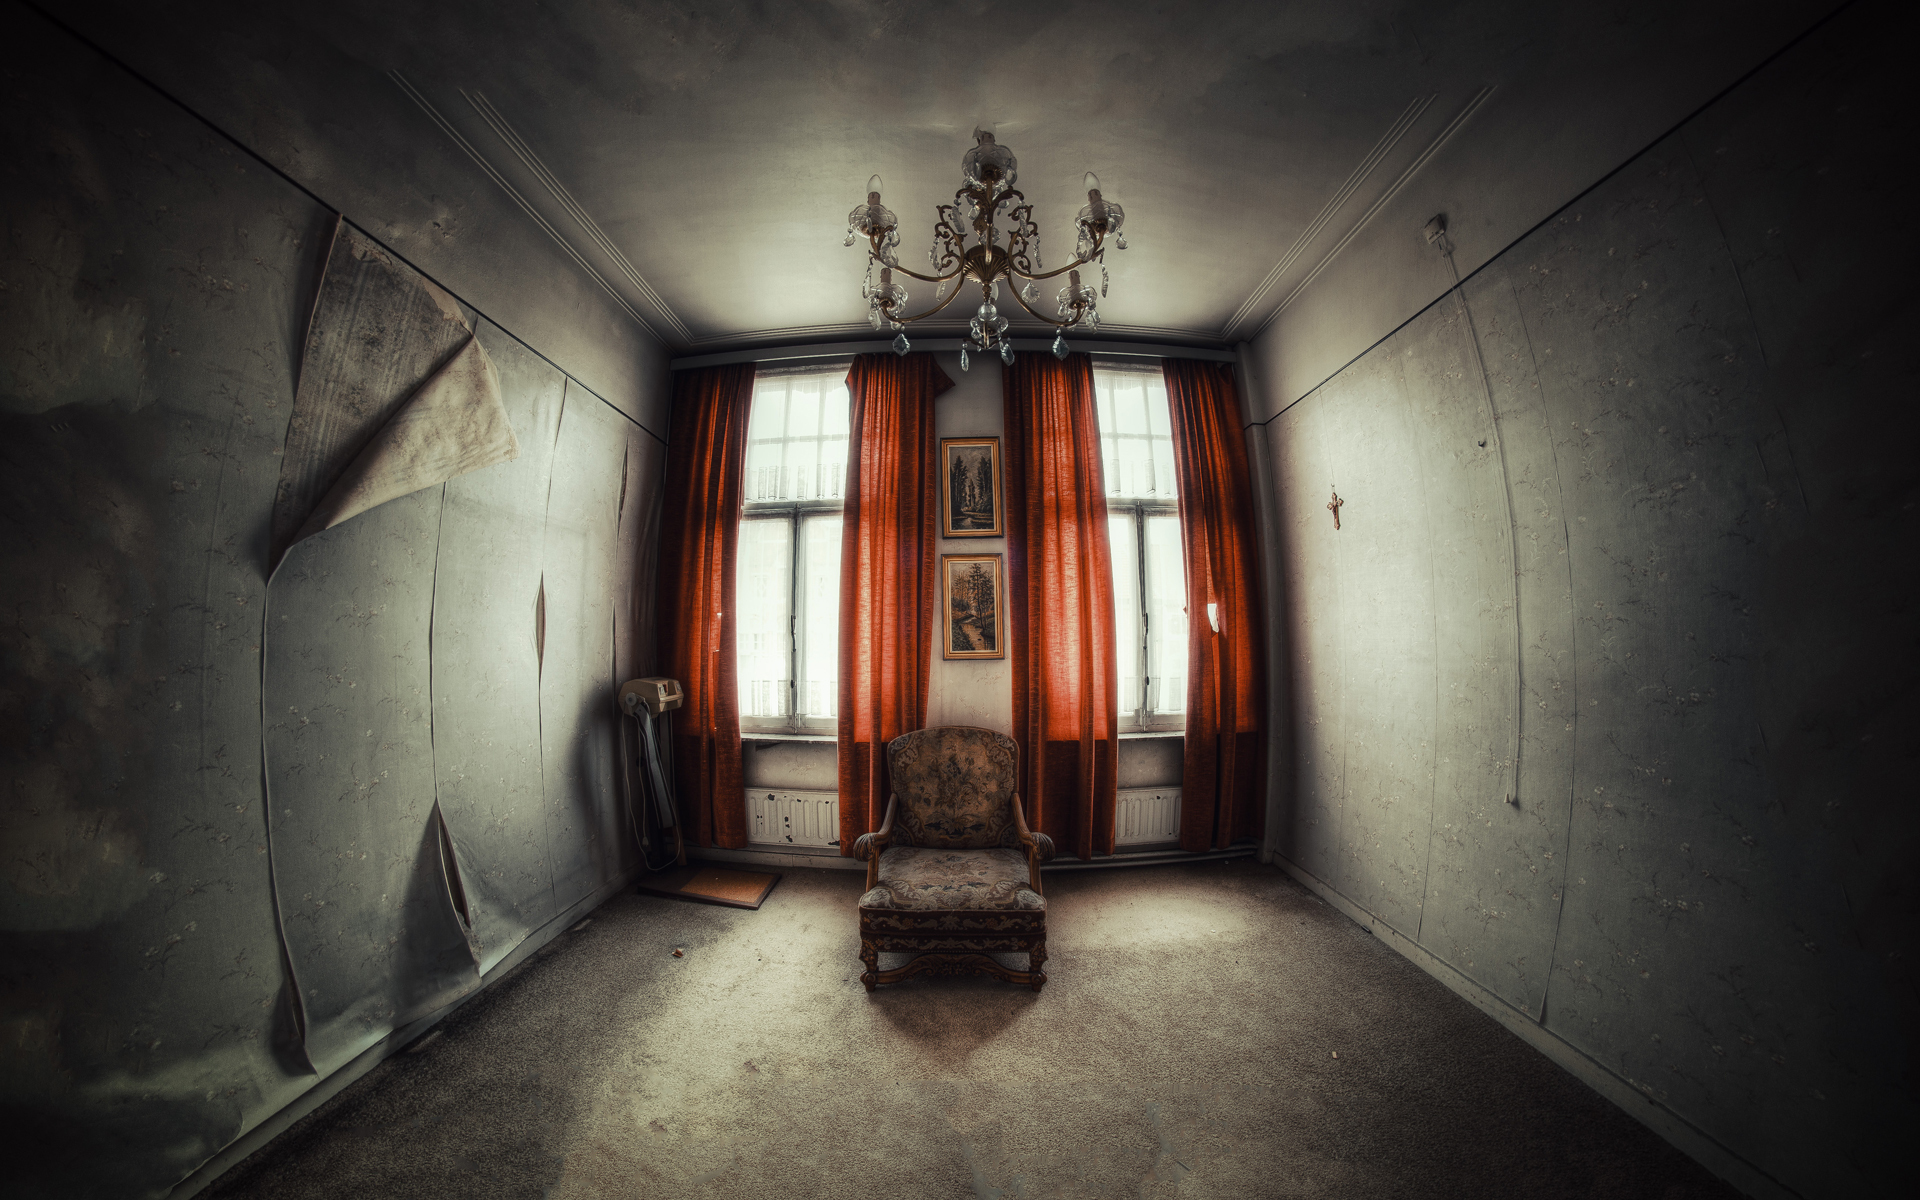 Gothic drak horror scary spooky creepy furniture window drapes chair mood chandelier light sunlight urban decay ruin abandonment wallpaperx1200